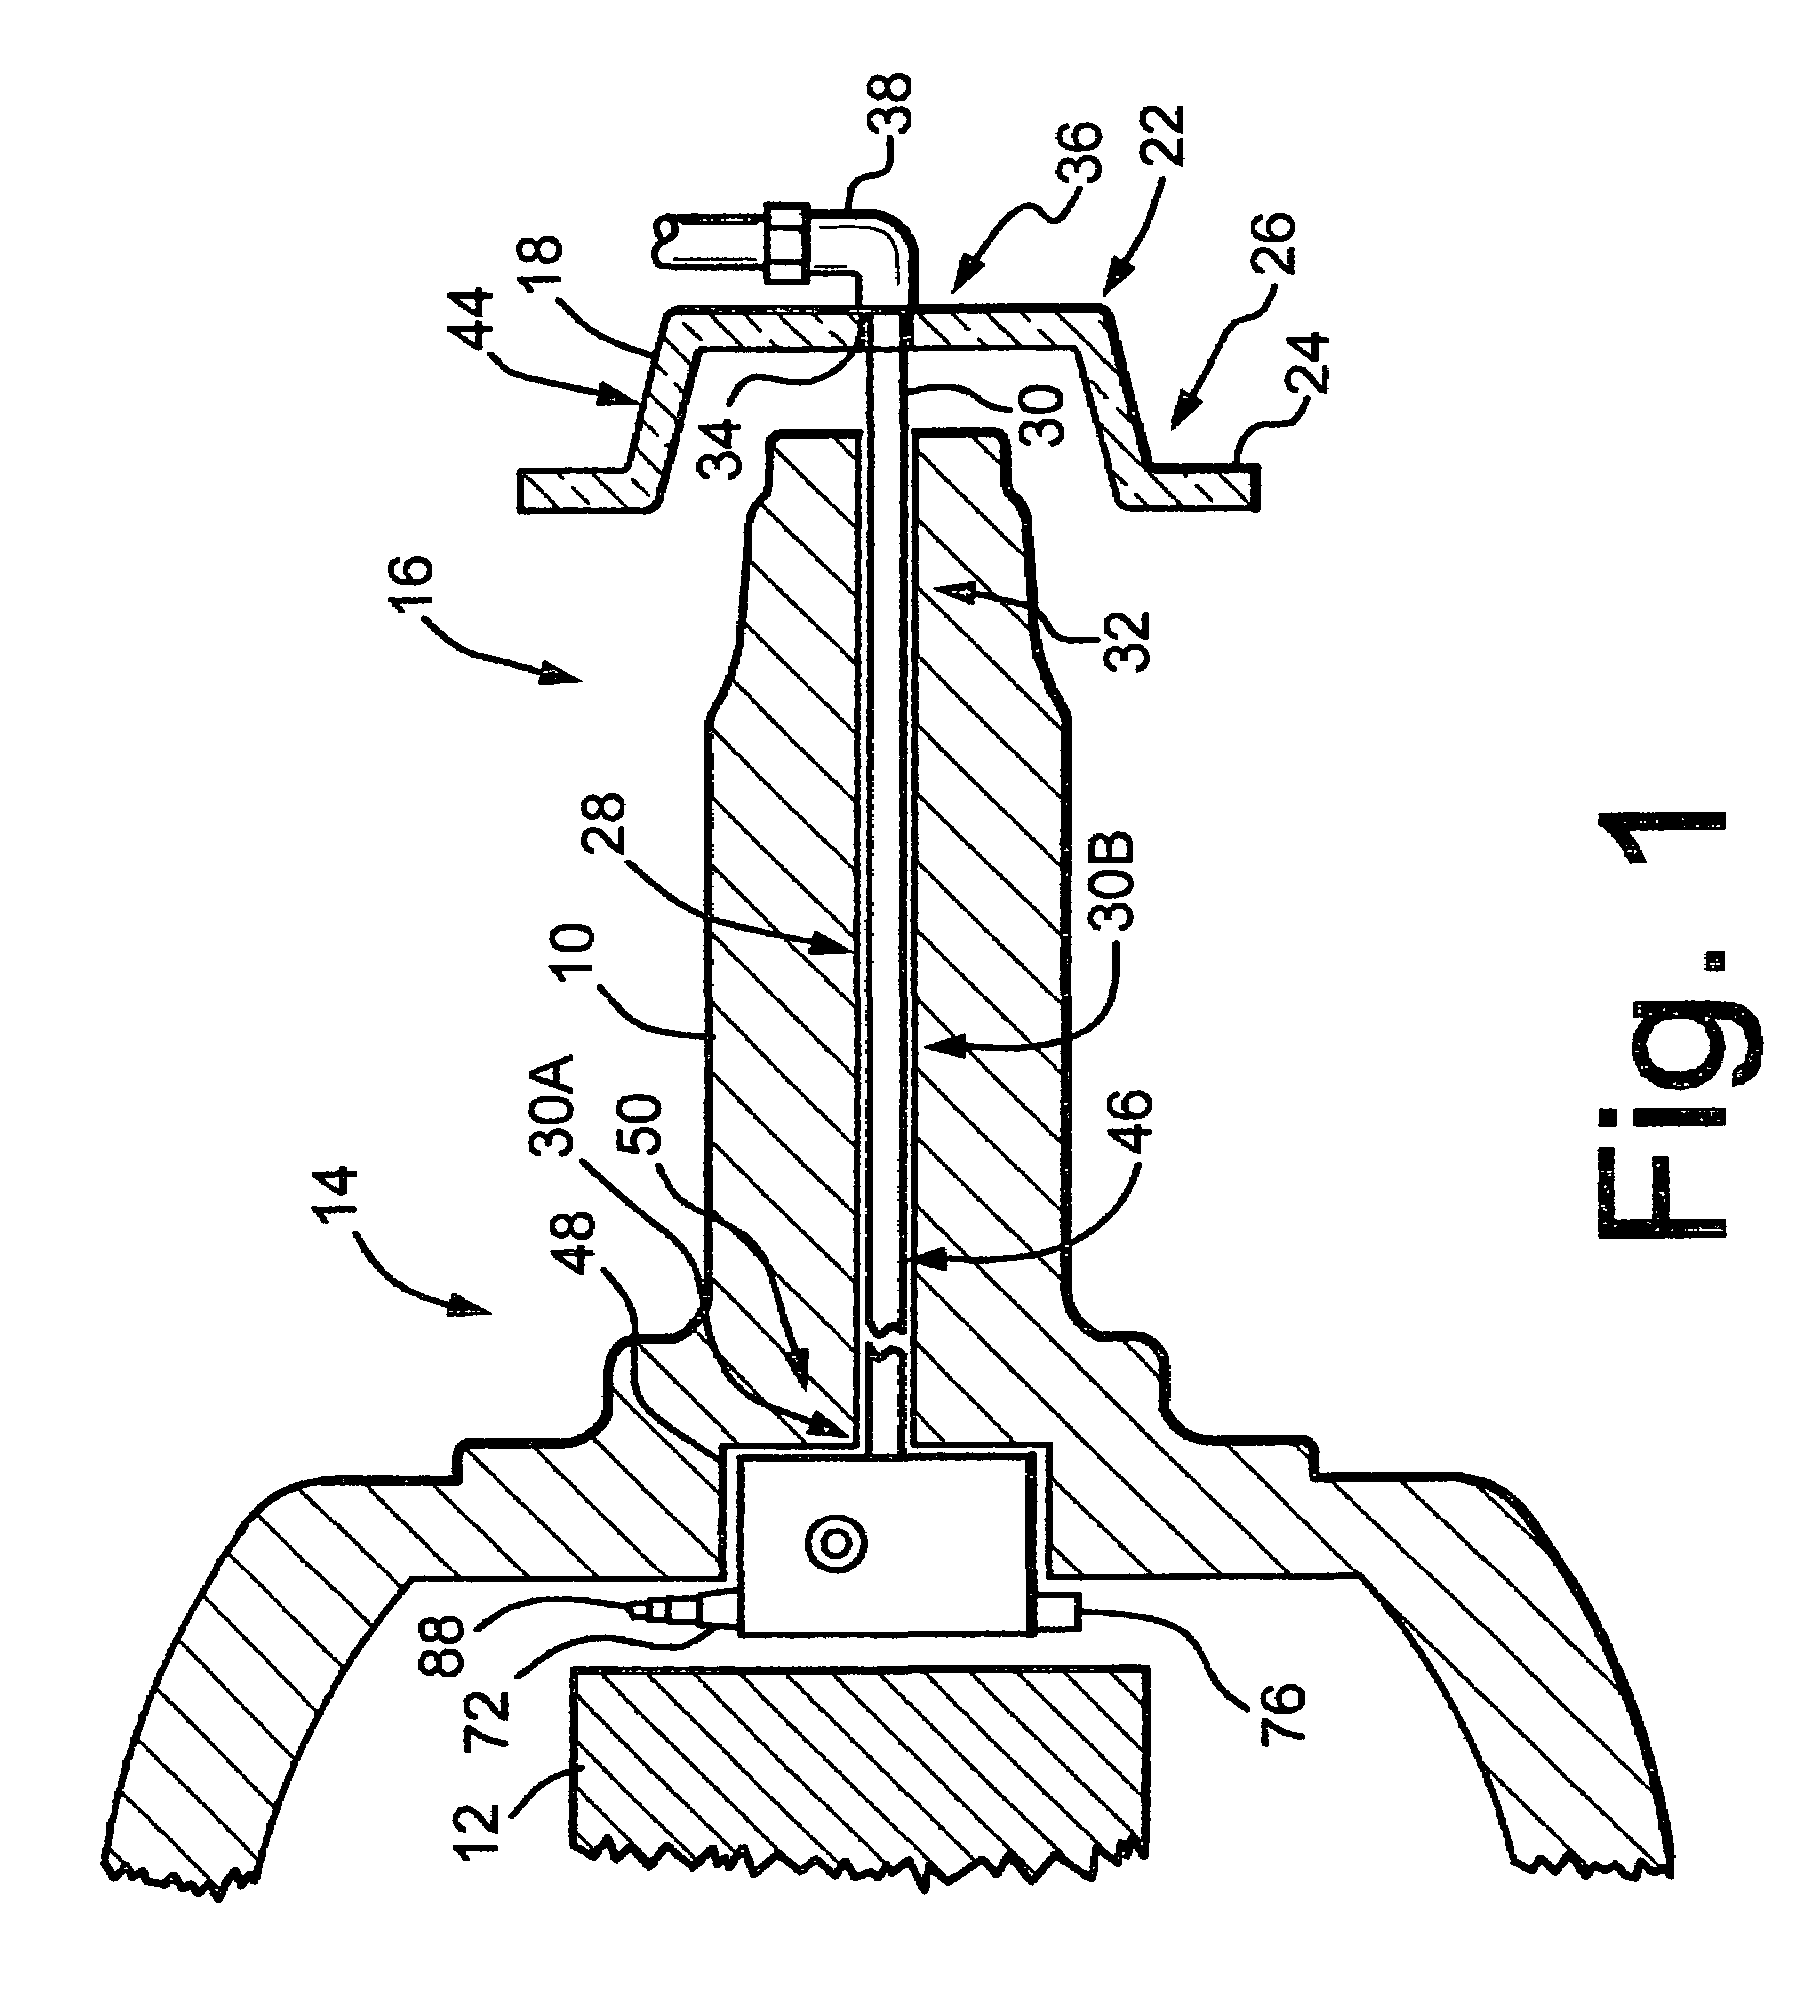 Vehicle tire inflation system and sensor and method of use